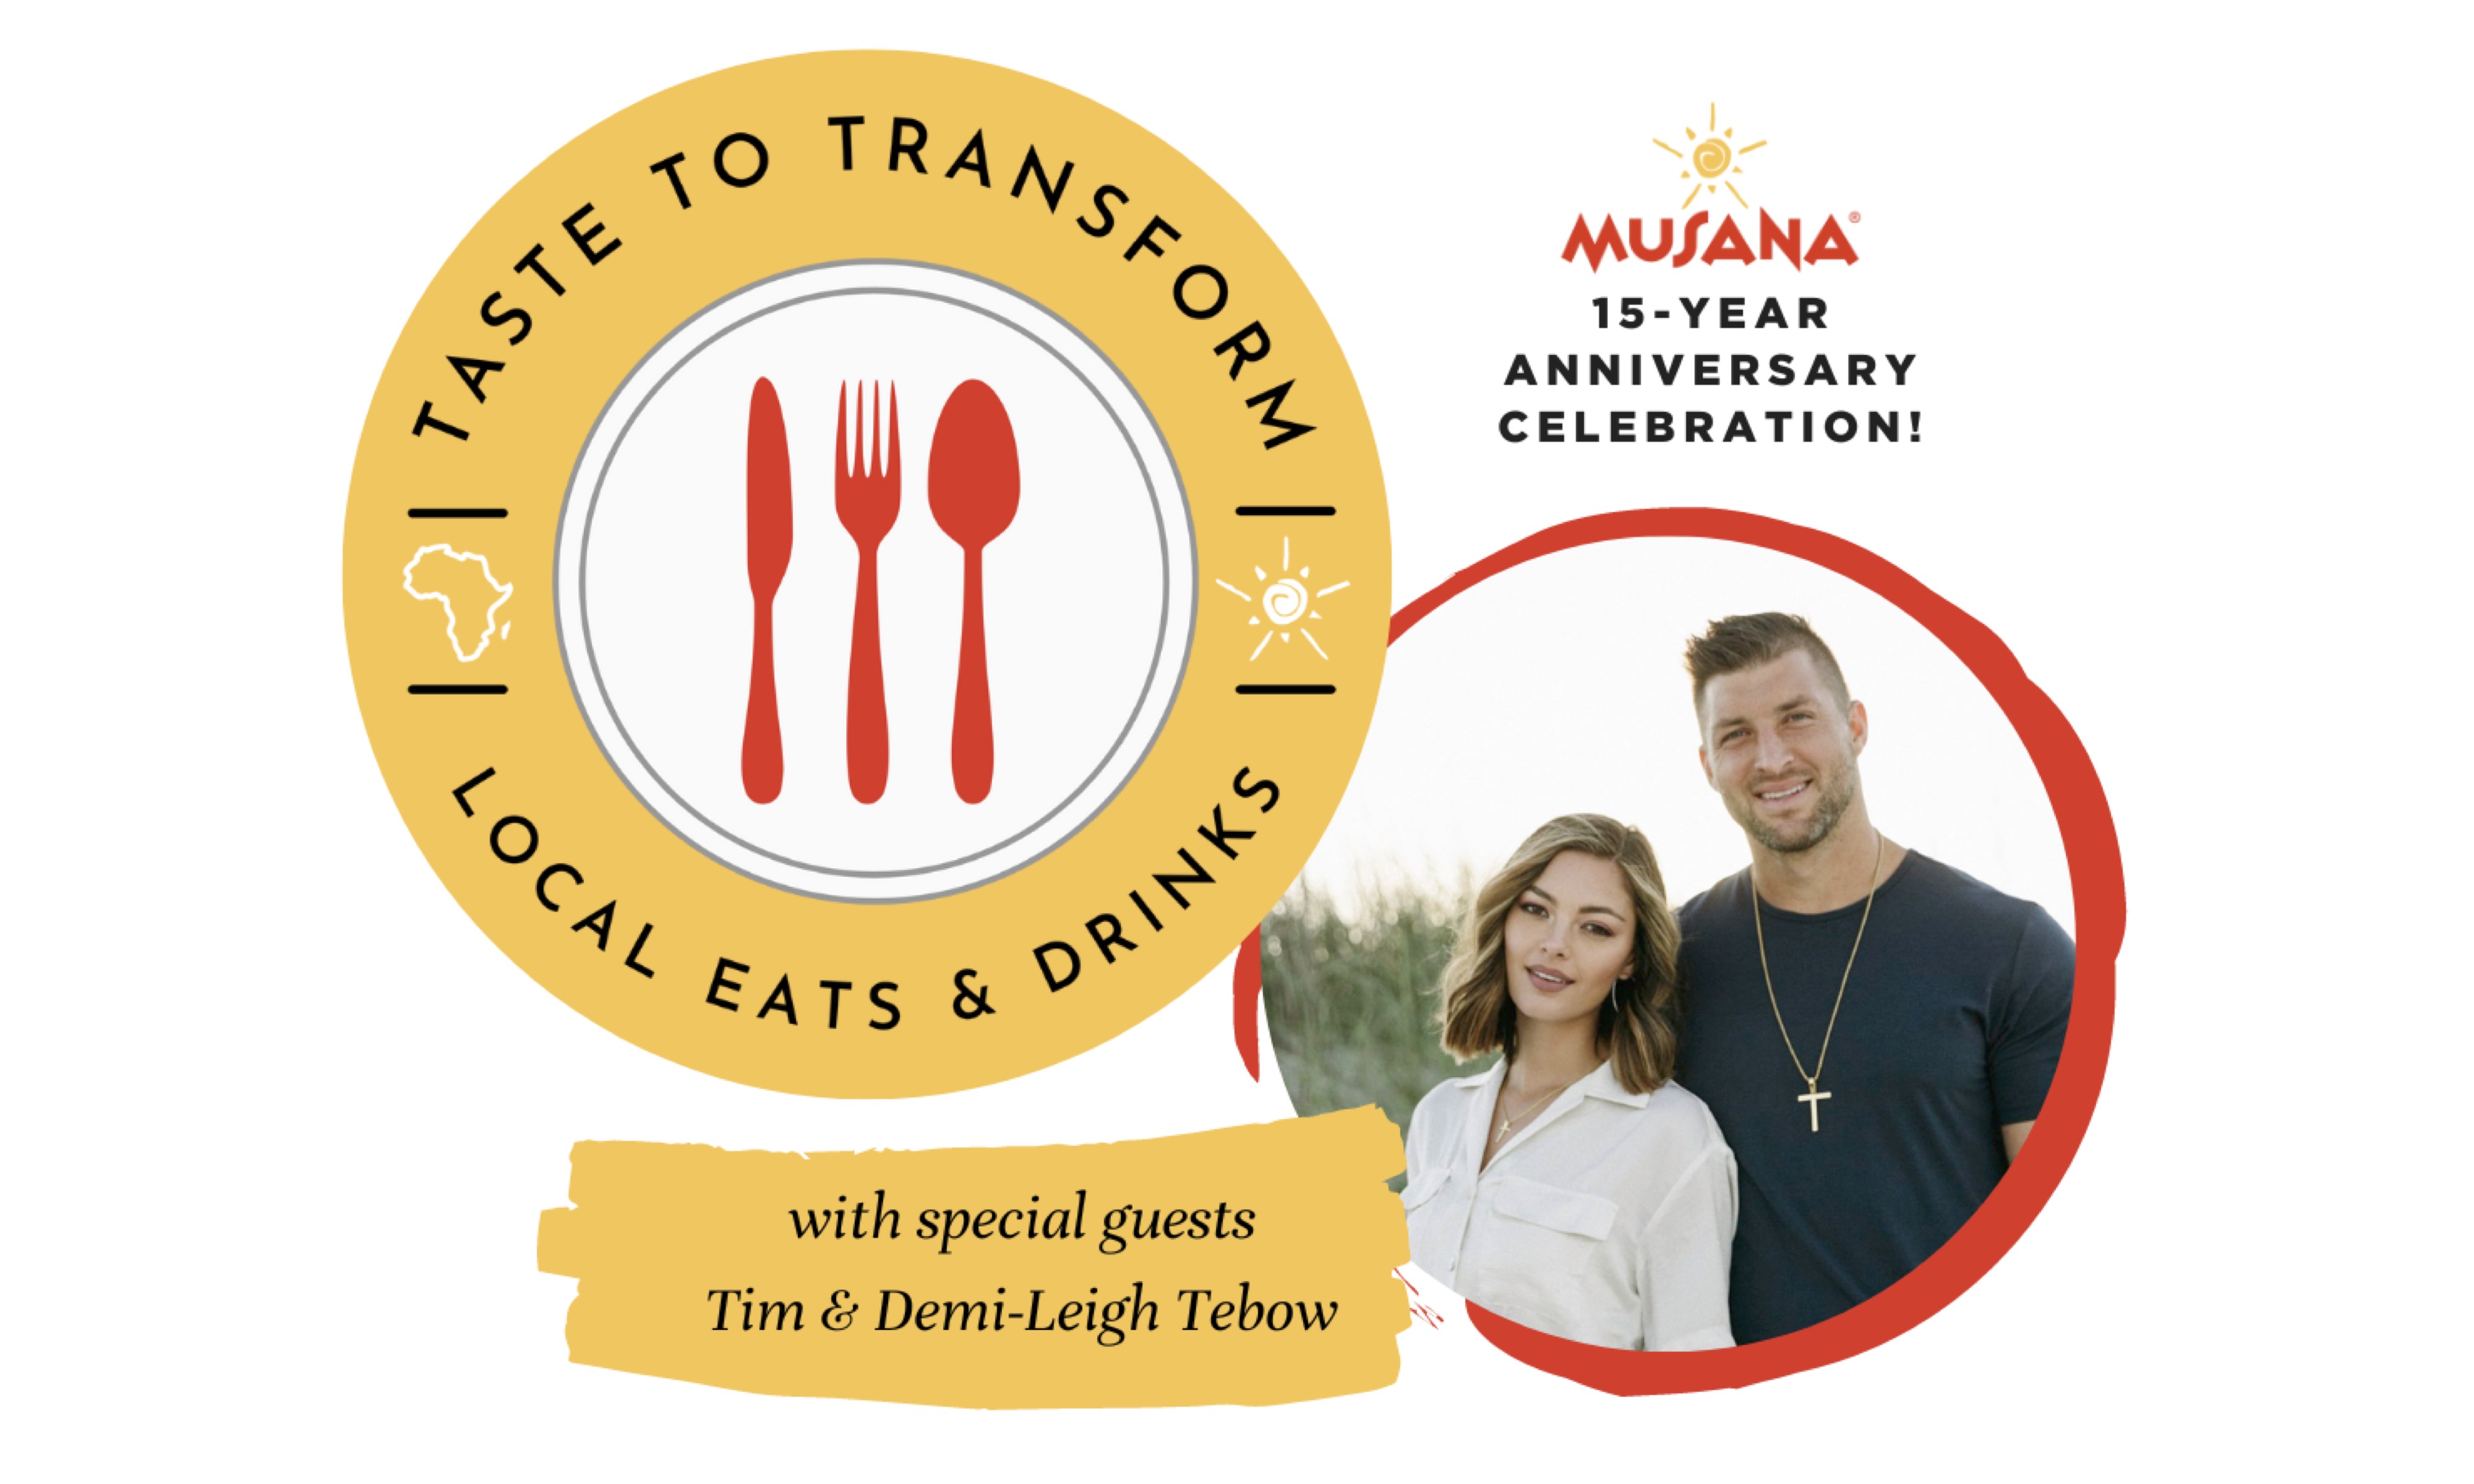 Musana 15 Year Anniversary Celebration. Taste to Transform. Local Eats and Drinks. With special guests Tim and Demi-Leigh Tebow. 